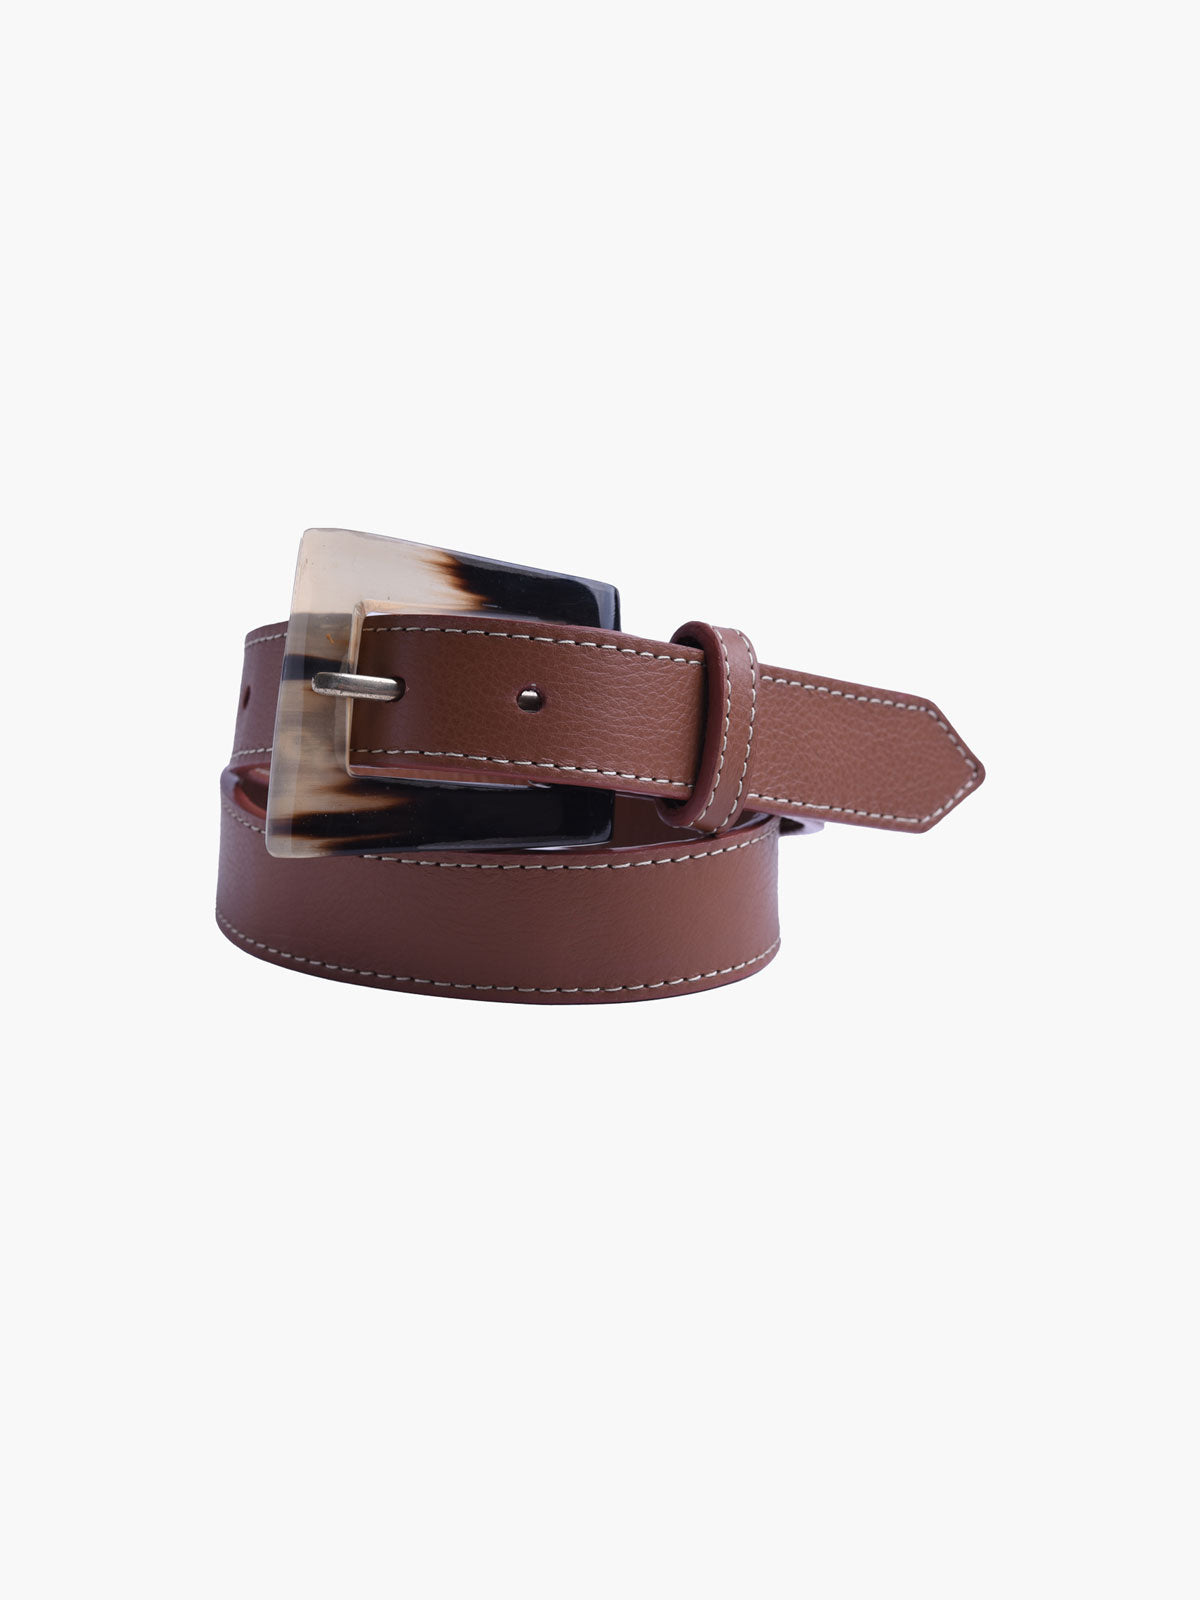 Azza Trapeze Belt in Leather Azza Trapeze Belt in Leather